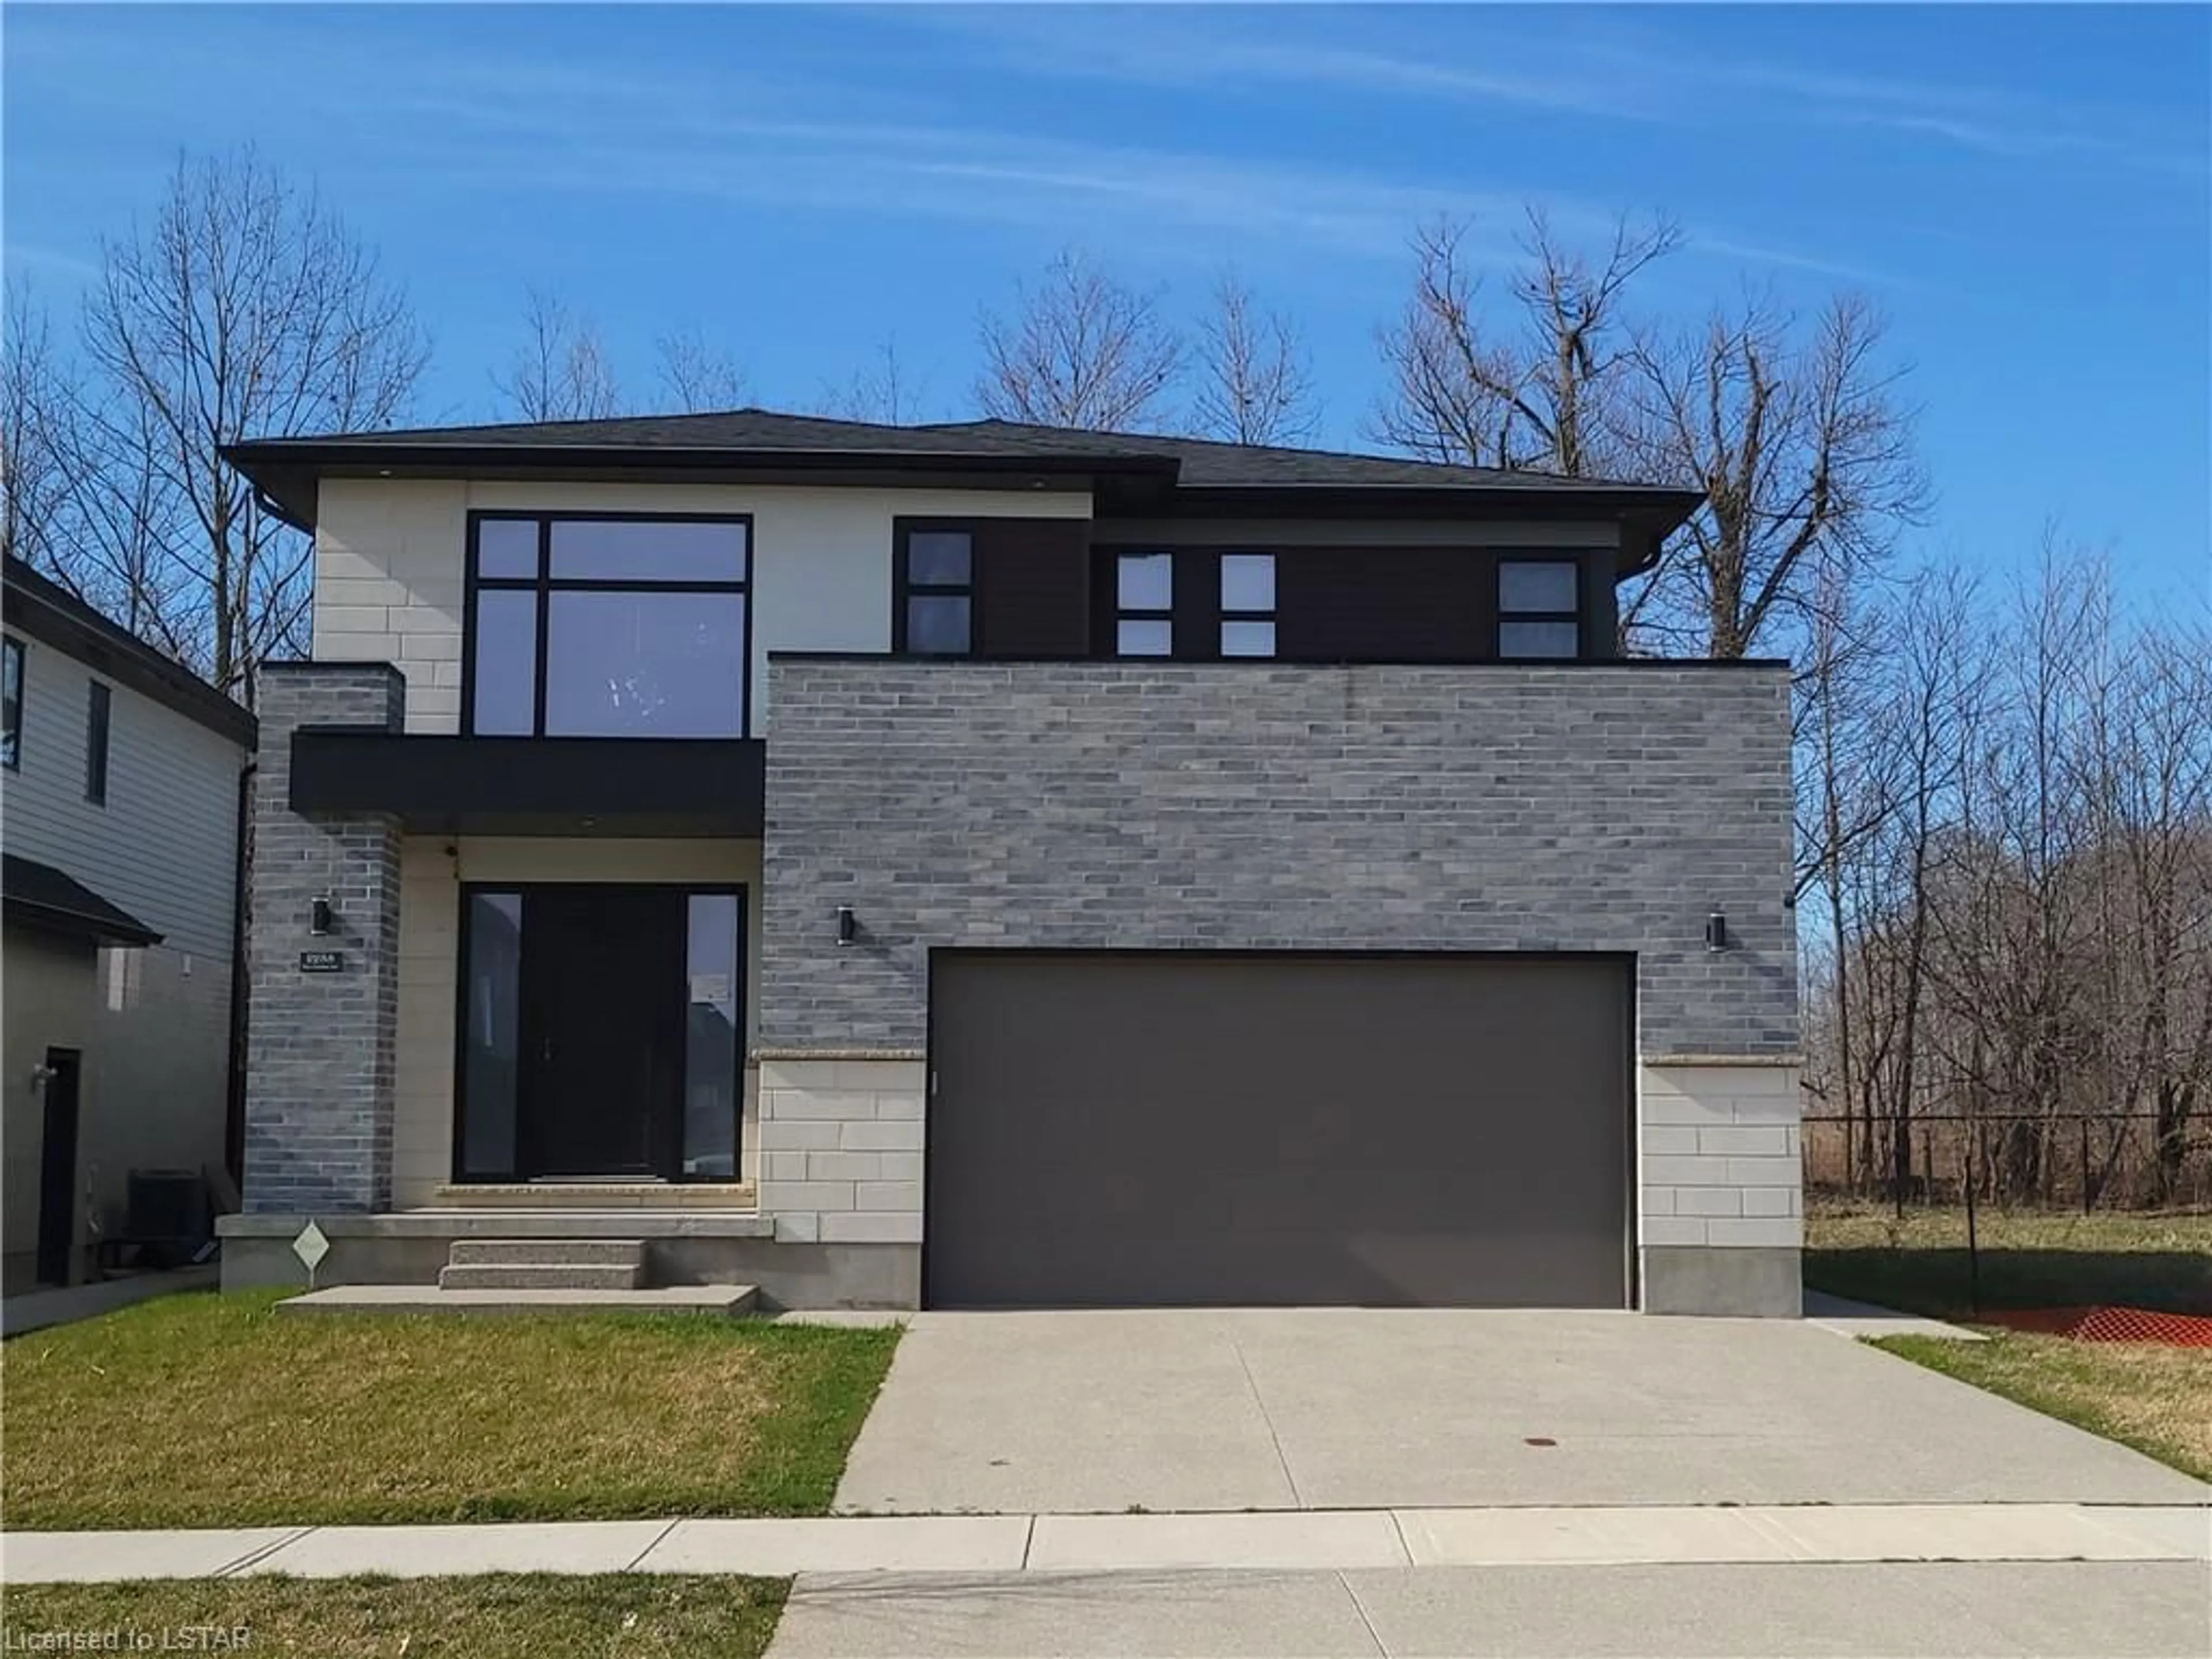 Home with brick exterior material for 2288 Red Thorne Avenue, London Ontario N6P 0E8